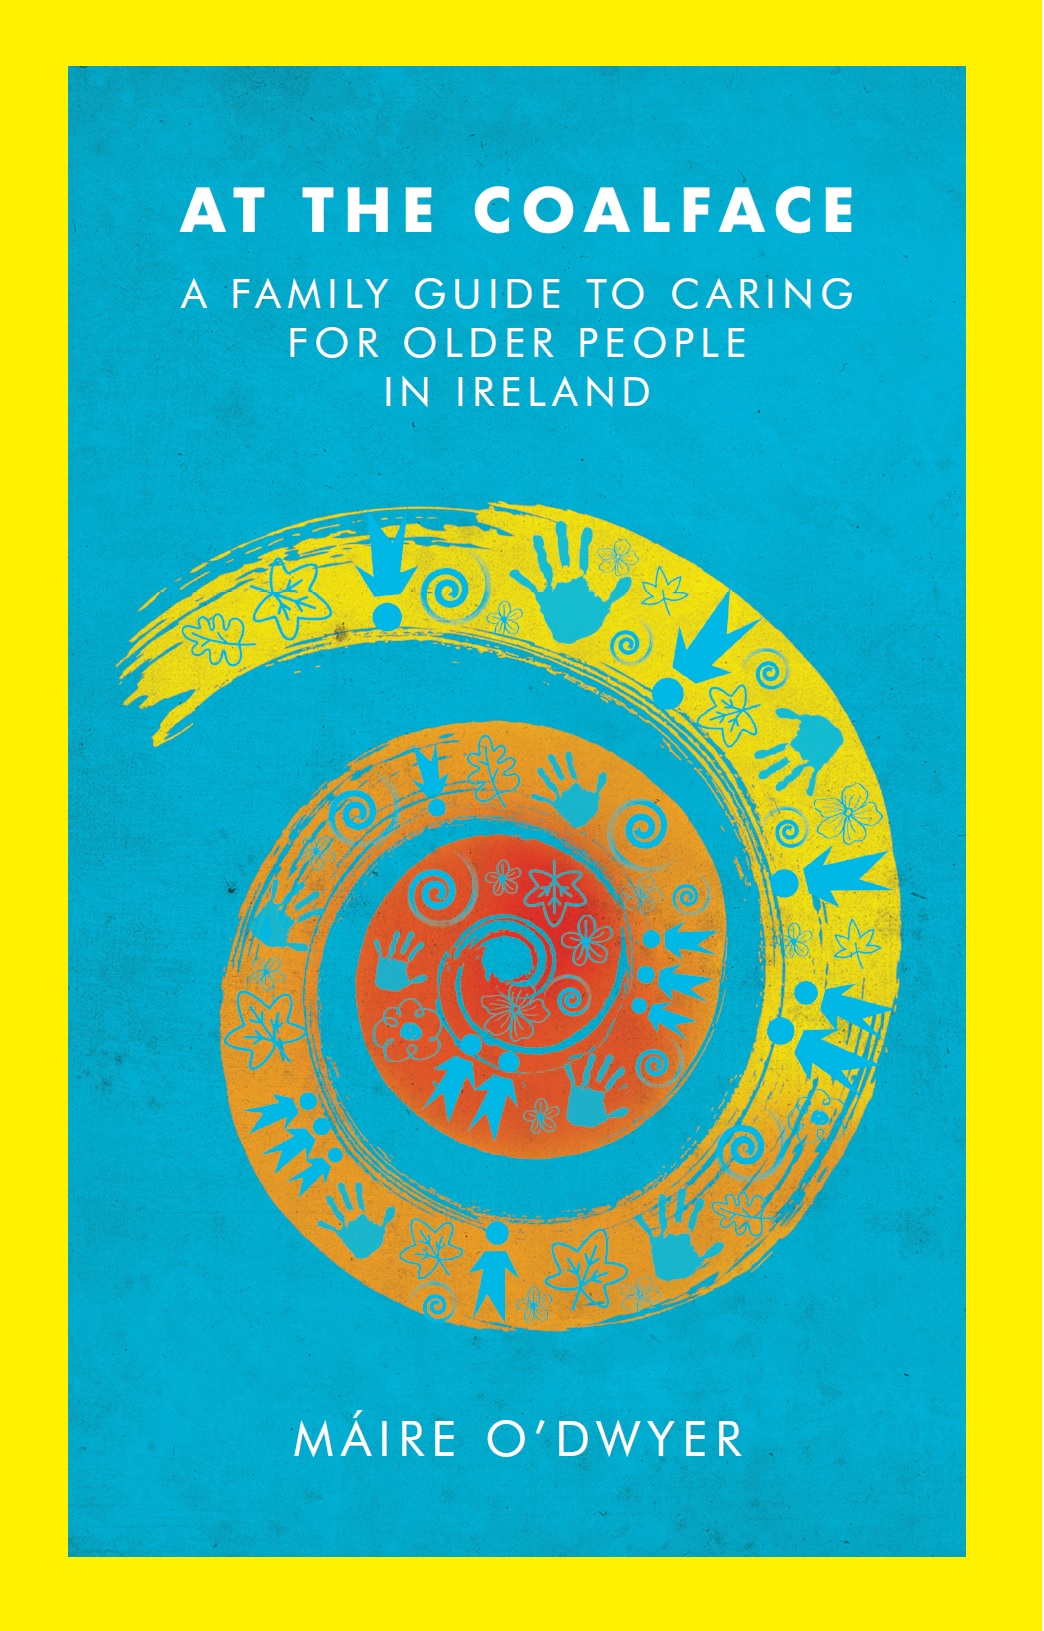 Book cover: At the coalface: A family guide to caring for older people in Ireland